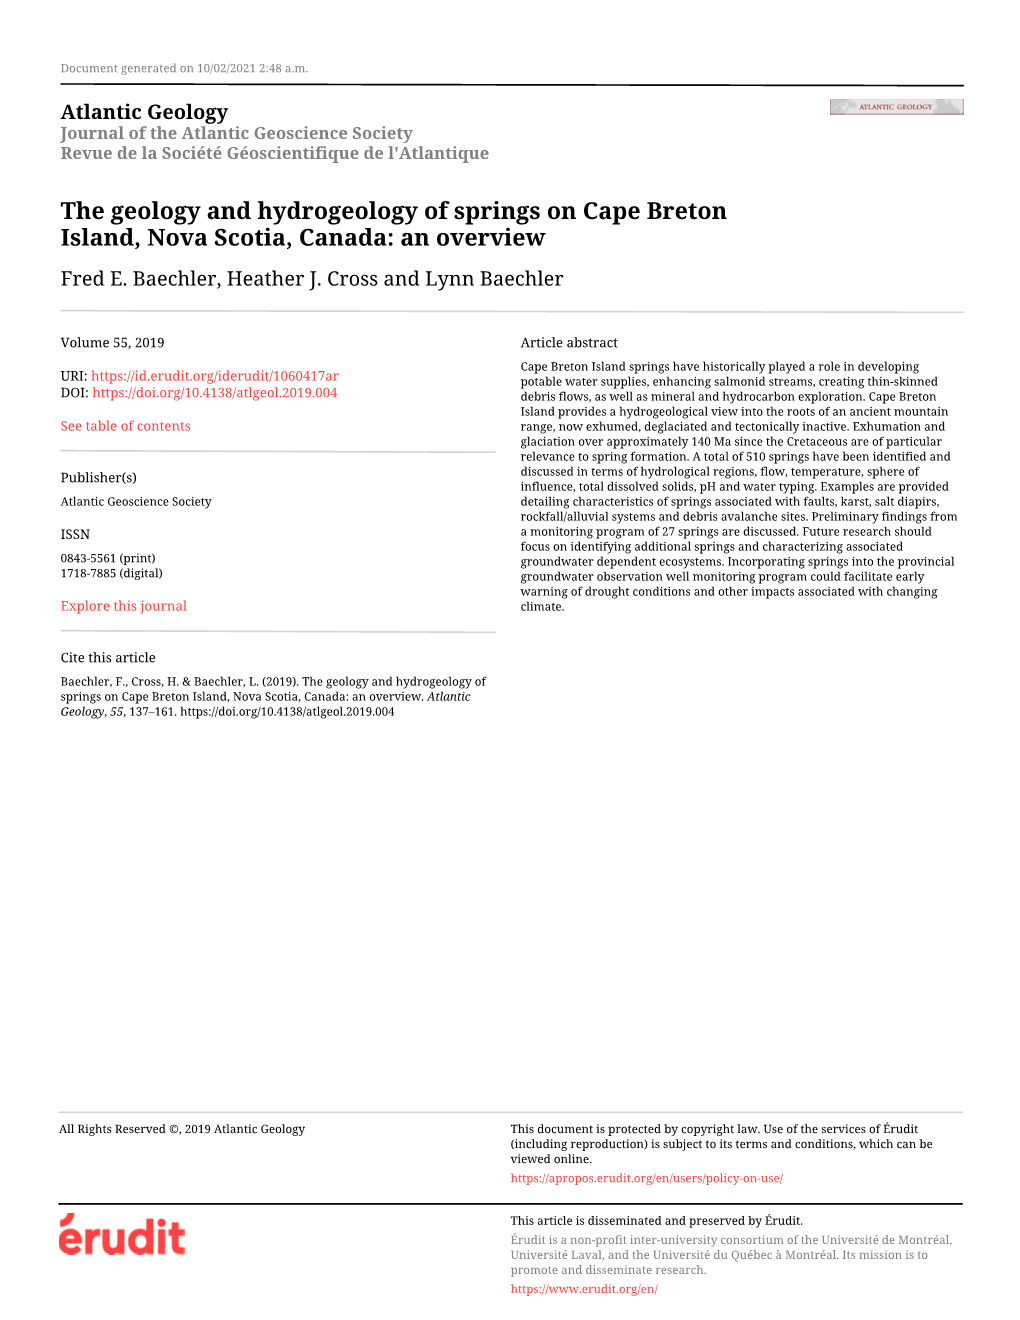 The Geology and Hydrogeology of Springs on Cape Breton Island, Nova Scotia, Canada: an Overview Fred E